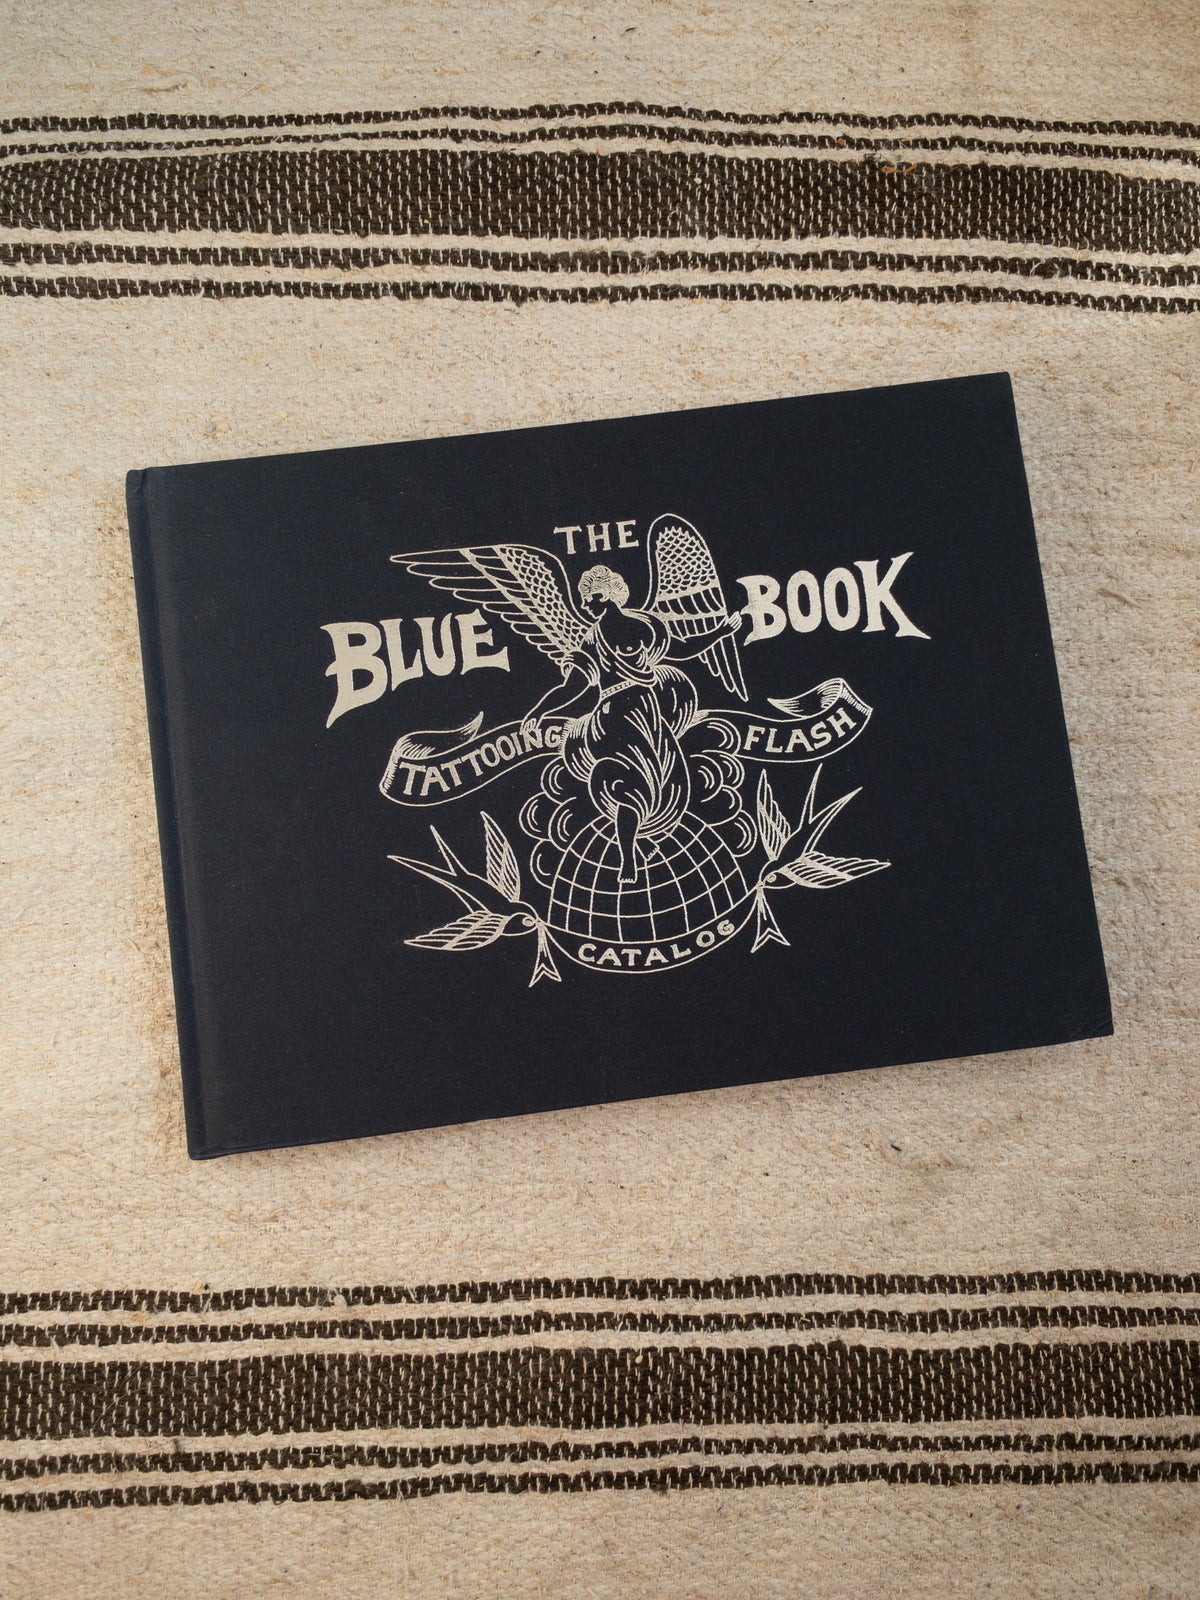 The Blue Book Tattooing Flash Catalog